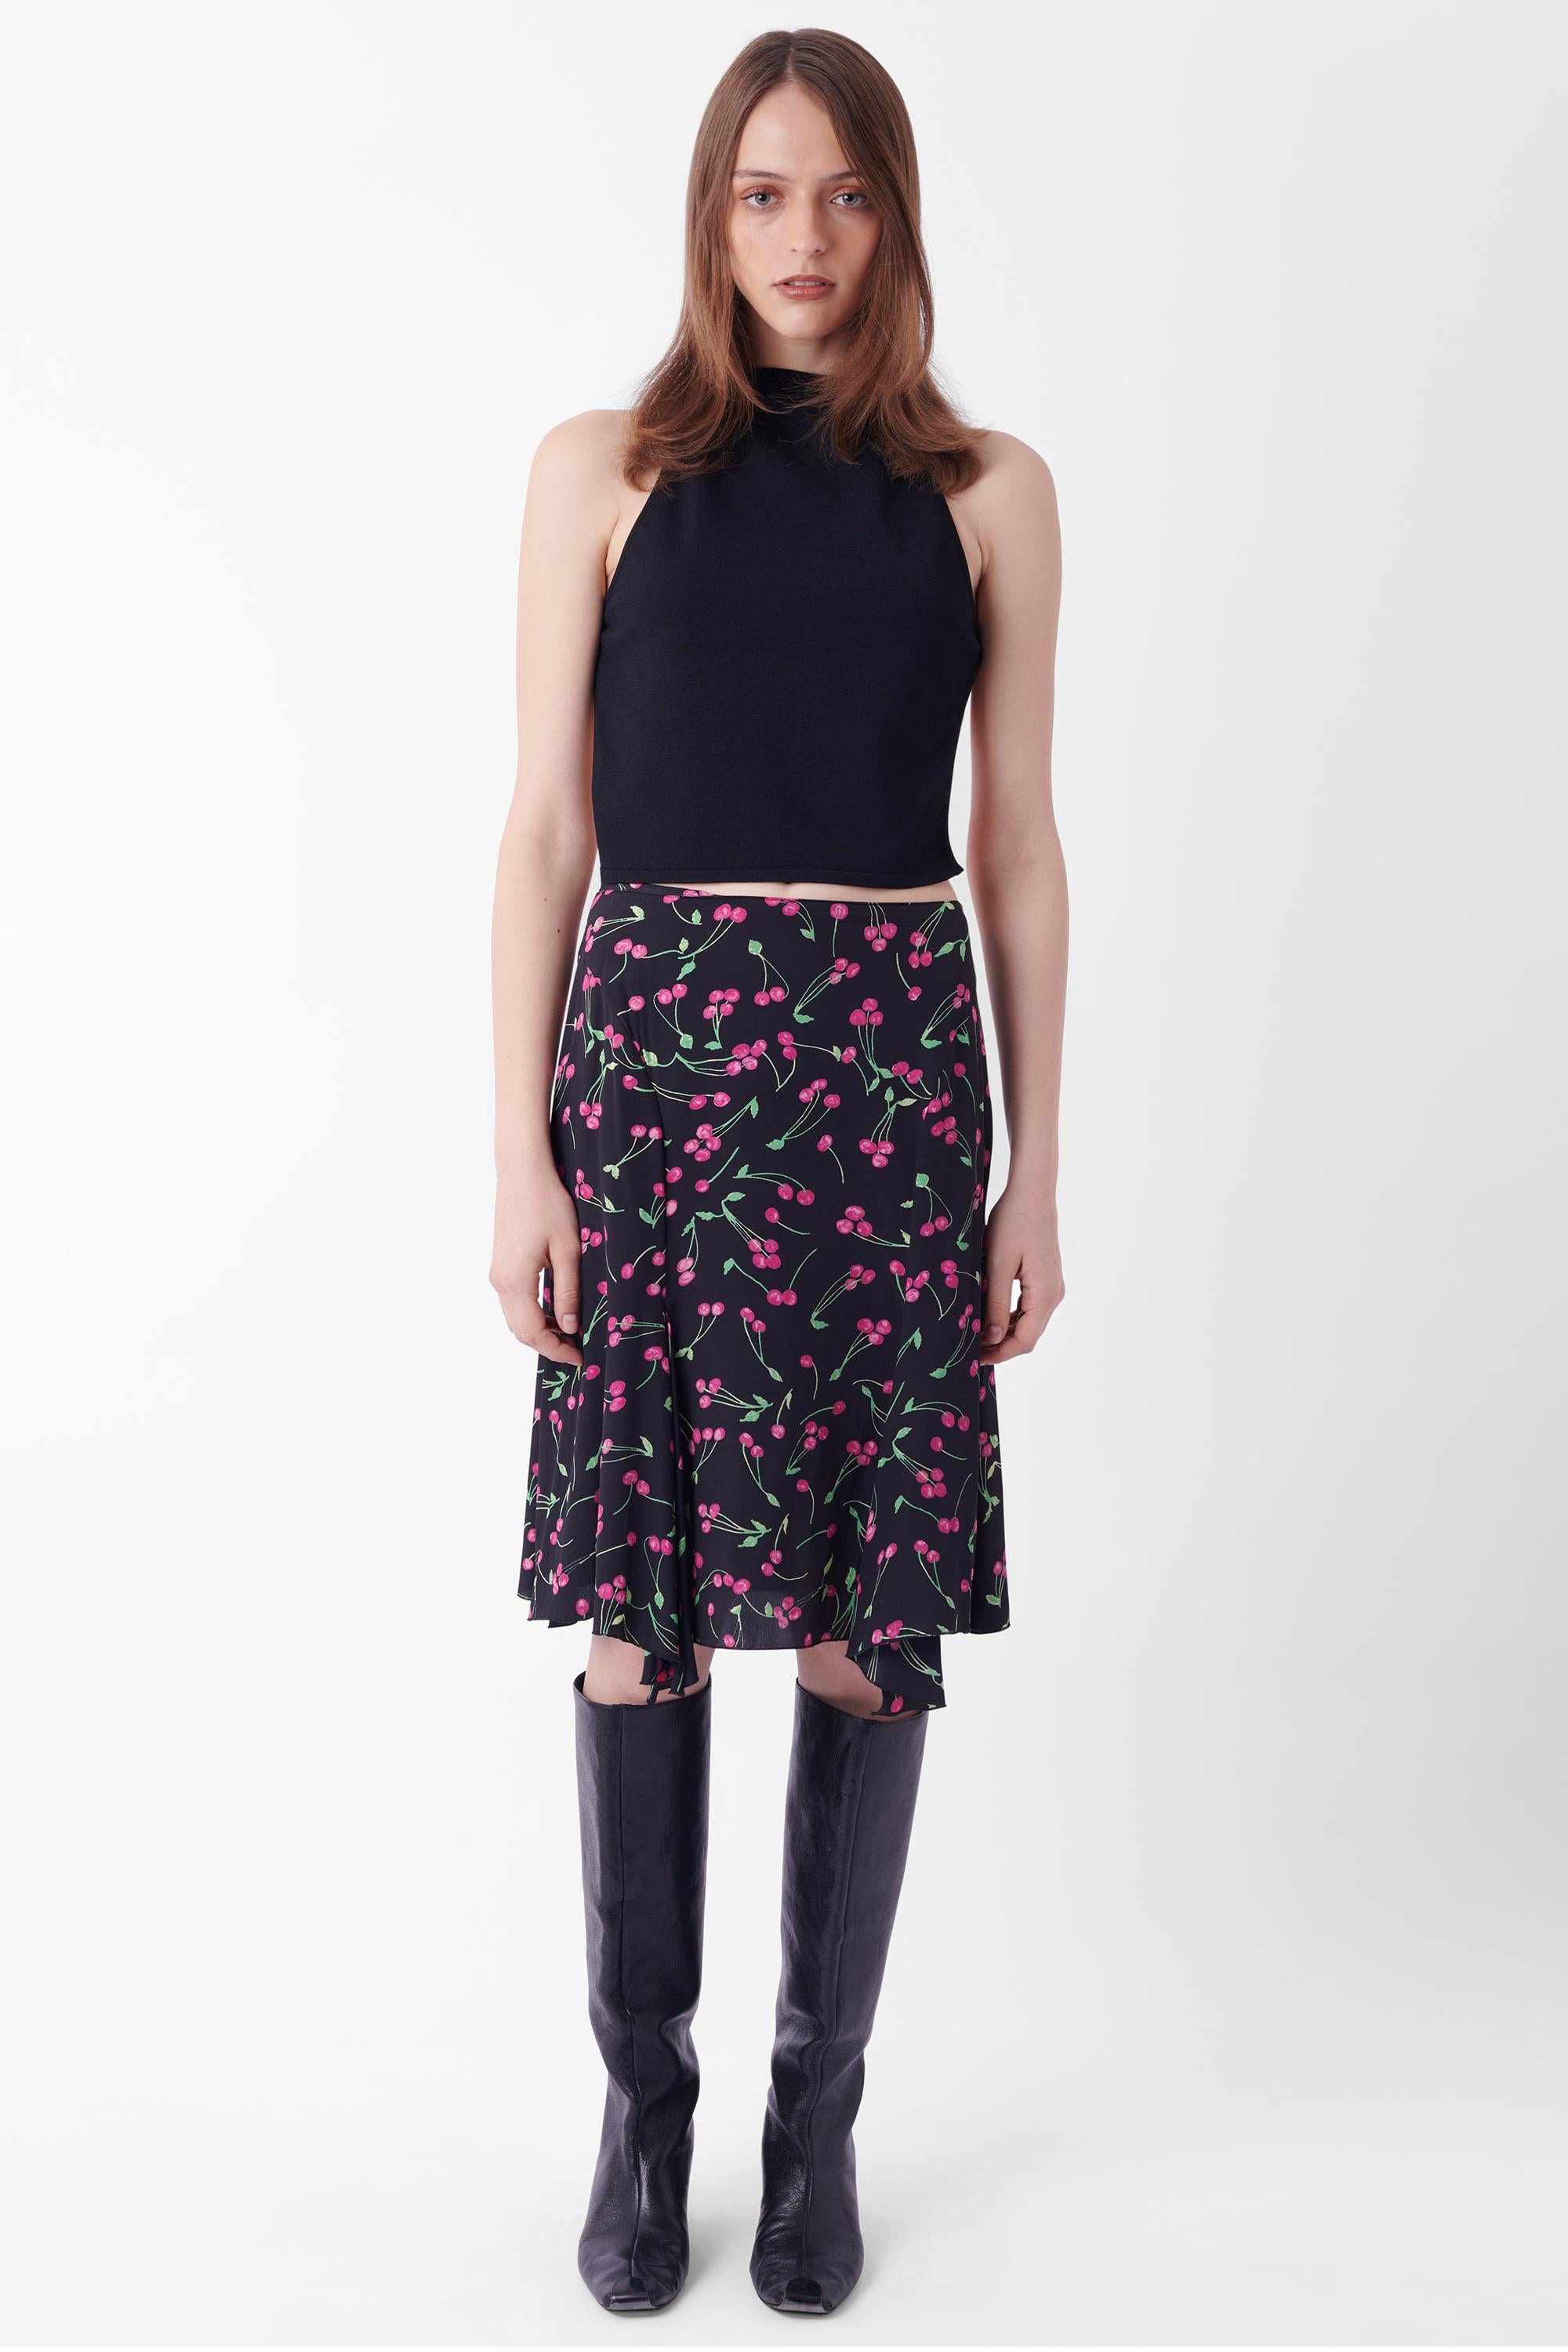 Blumarine Cherry Print Silk Skirt In Excellent Condition For Sale In London, GB